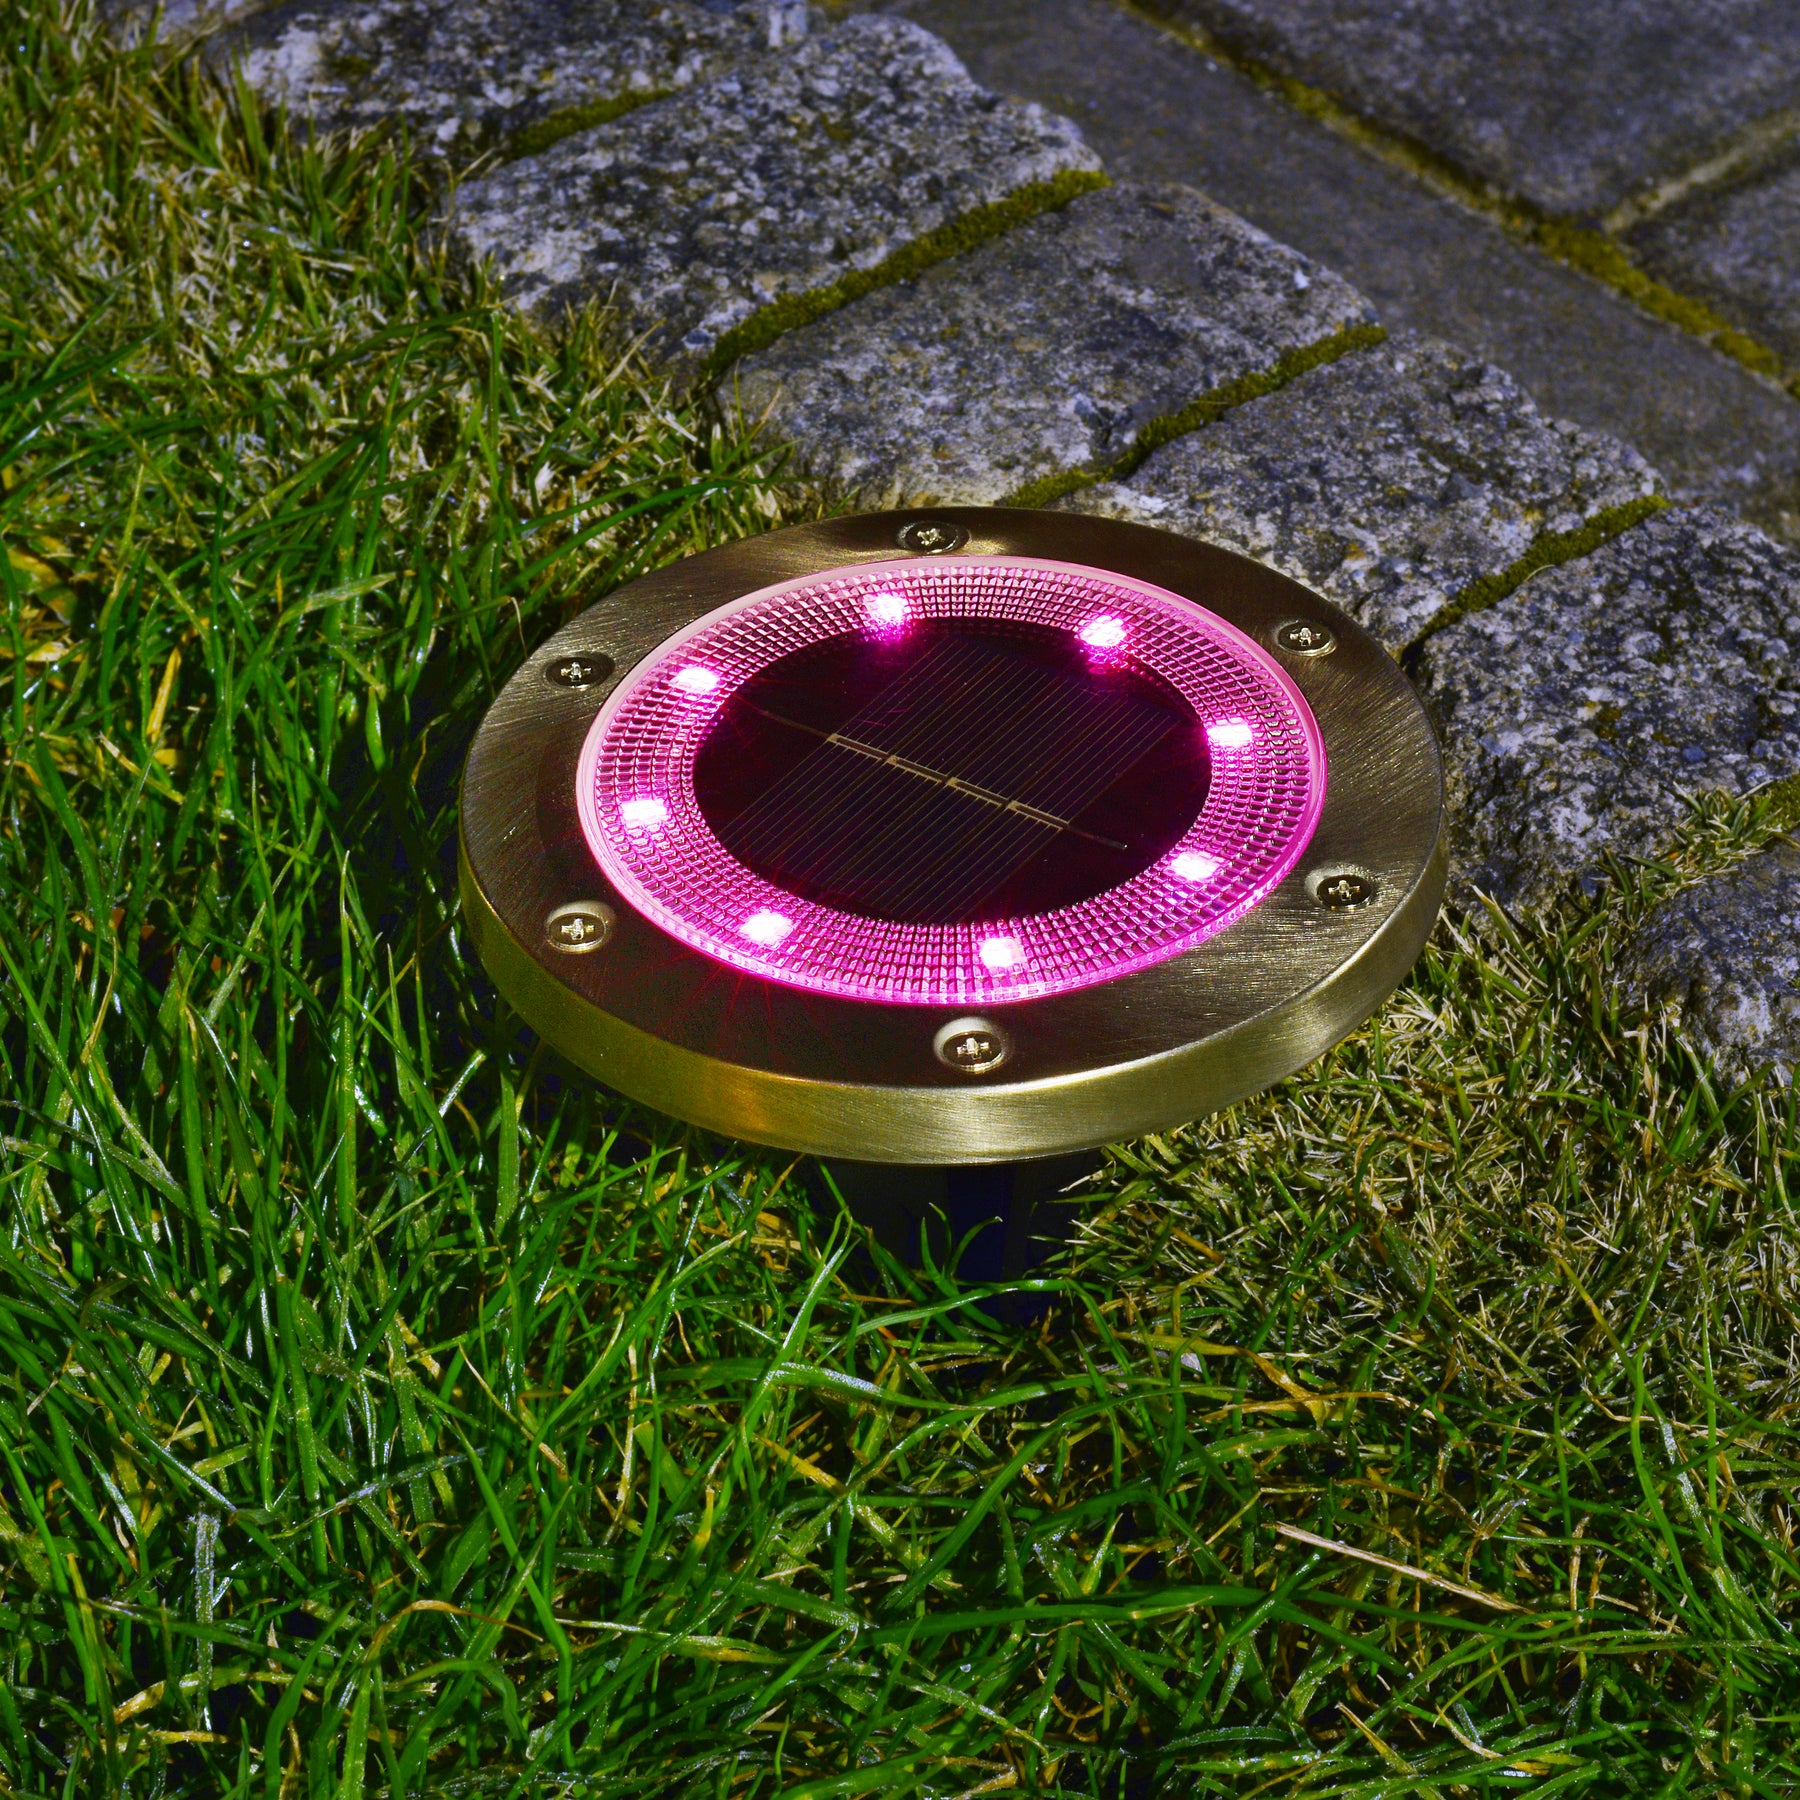 Bliss Outdoors Solar Powered LED Metal Disc Pathway light in the ground lighting up pink.